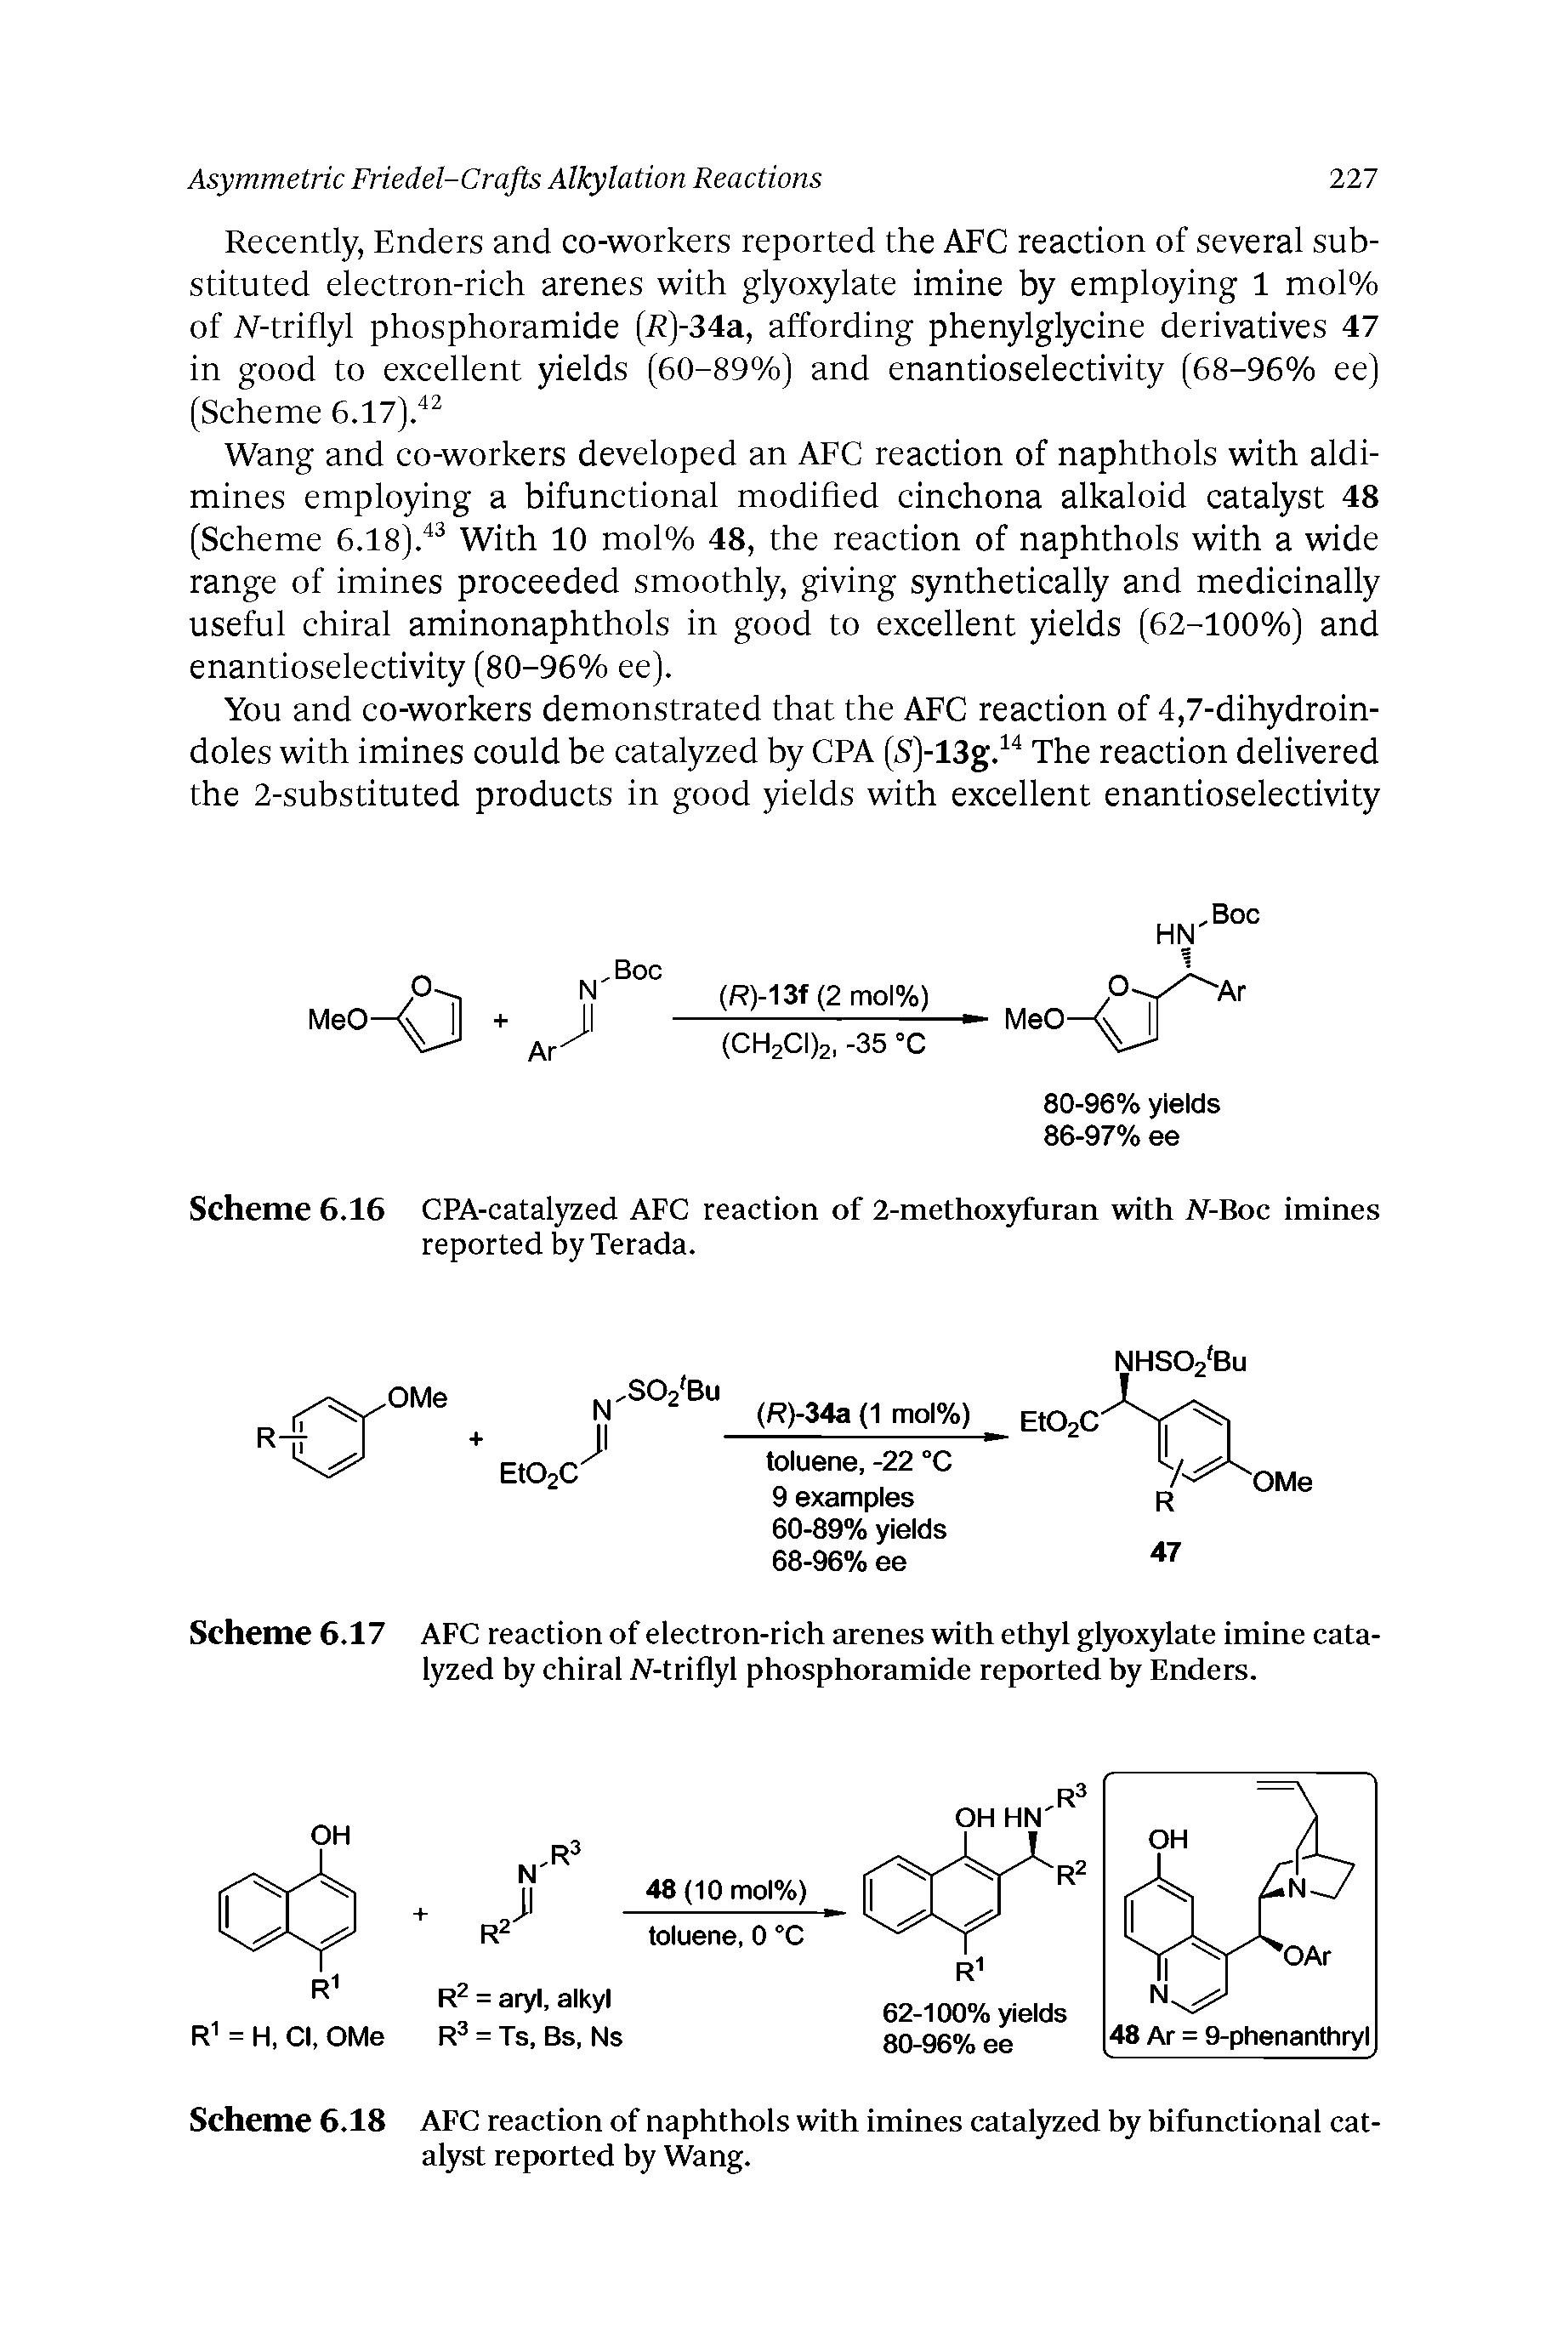 Scheme 6.17 AFC reaction of electron-rich arenes with ethyl glyoxylate imine catalyzed by chiral N-triflyl phosphoramide reported by Enders.